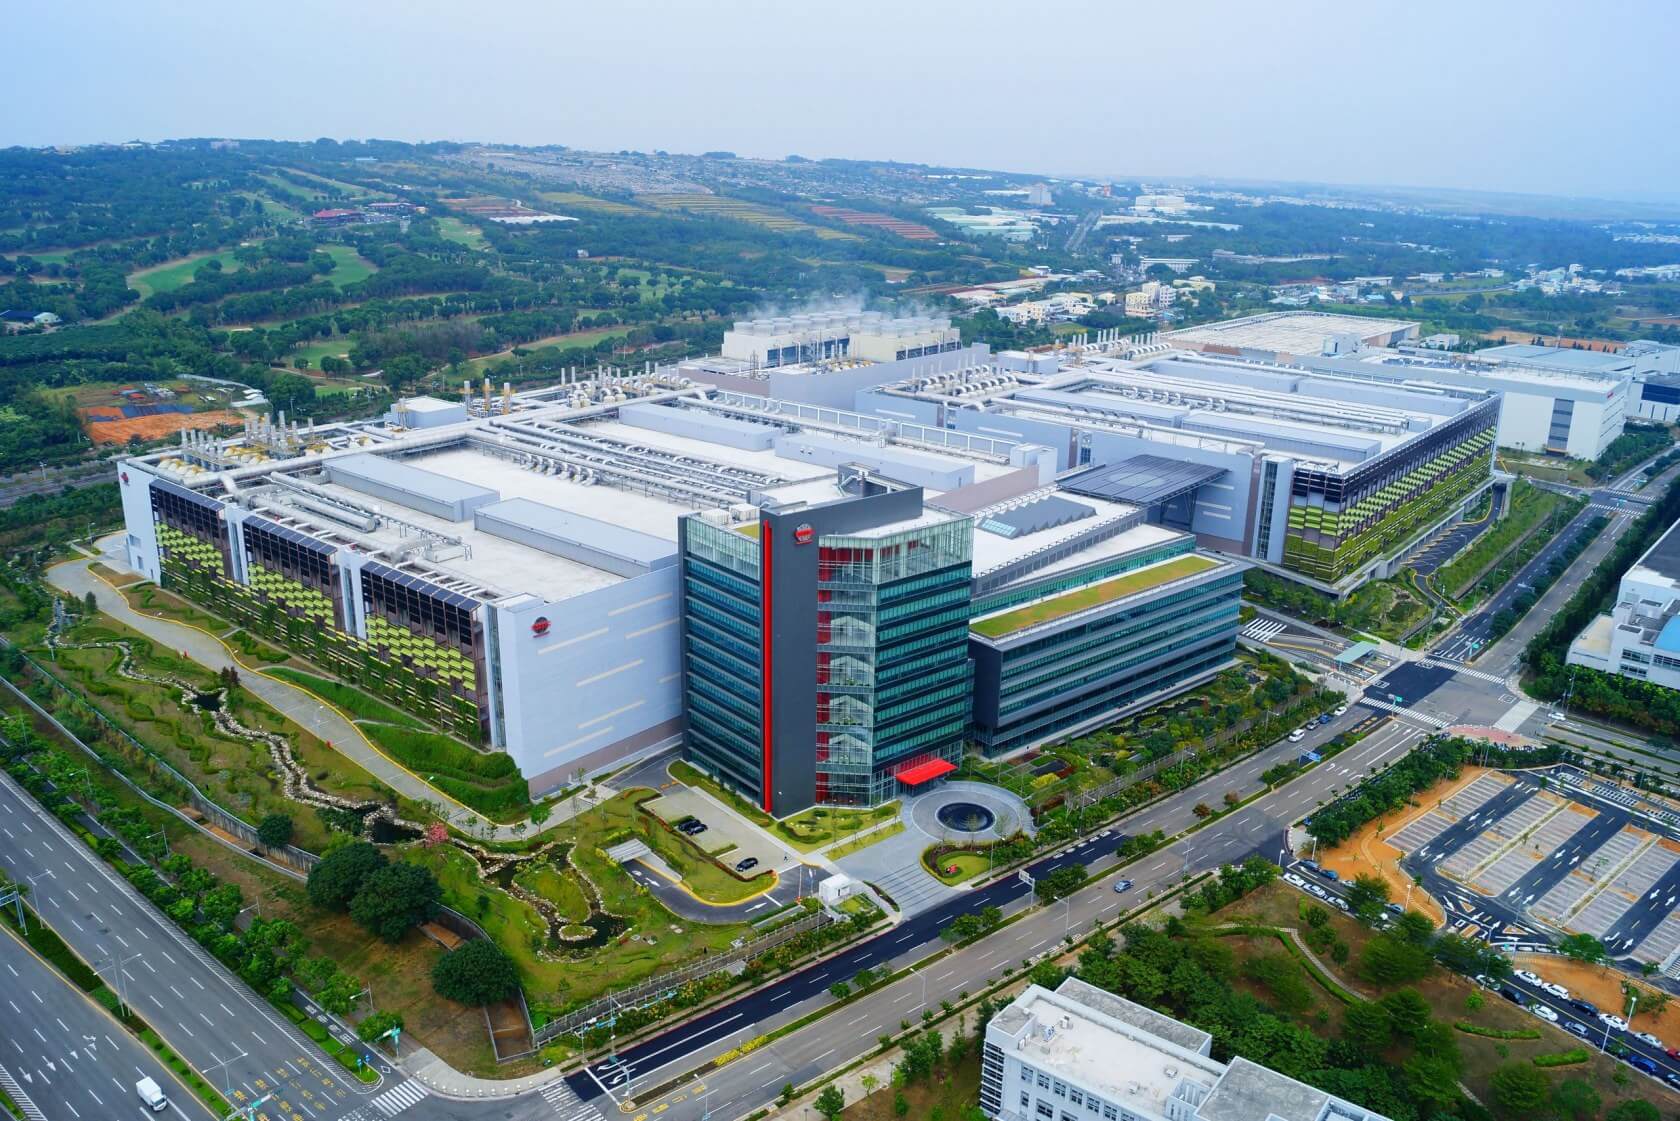 AMD is set to become TSMC's biggest 7nm customer in 2020